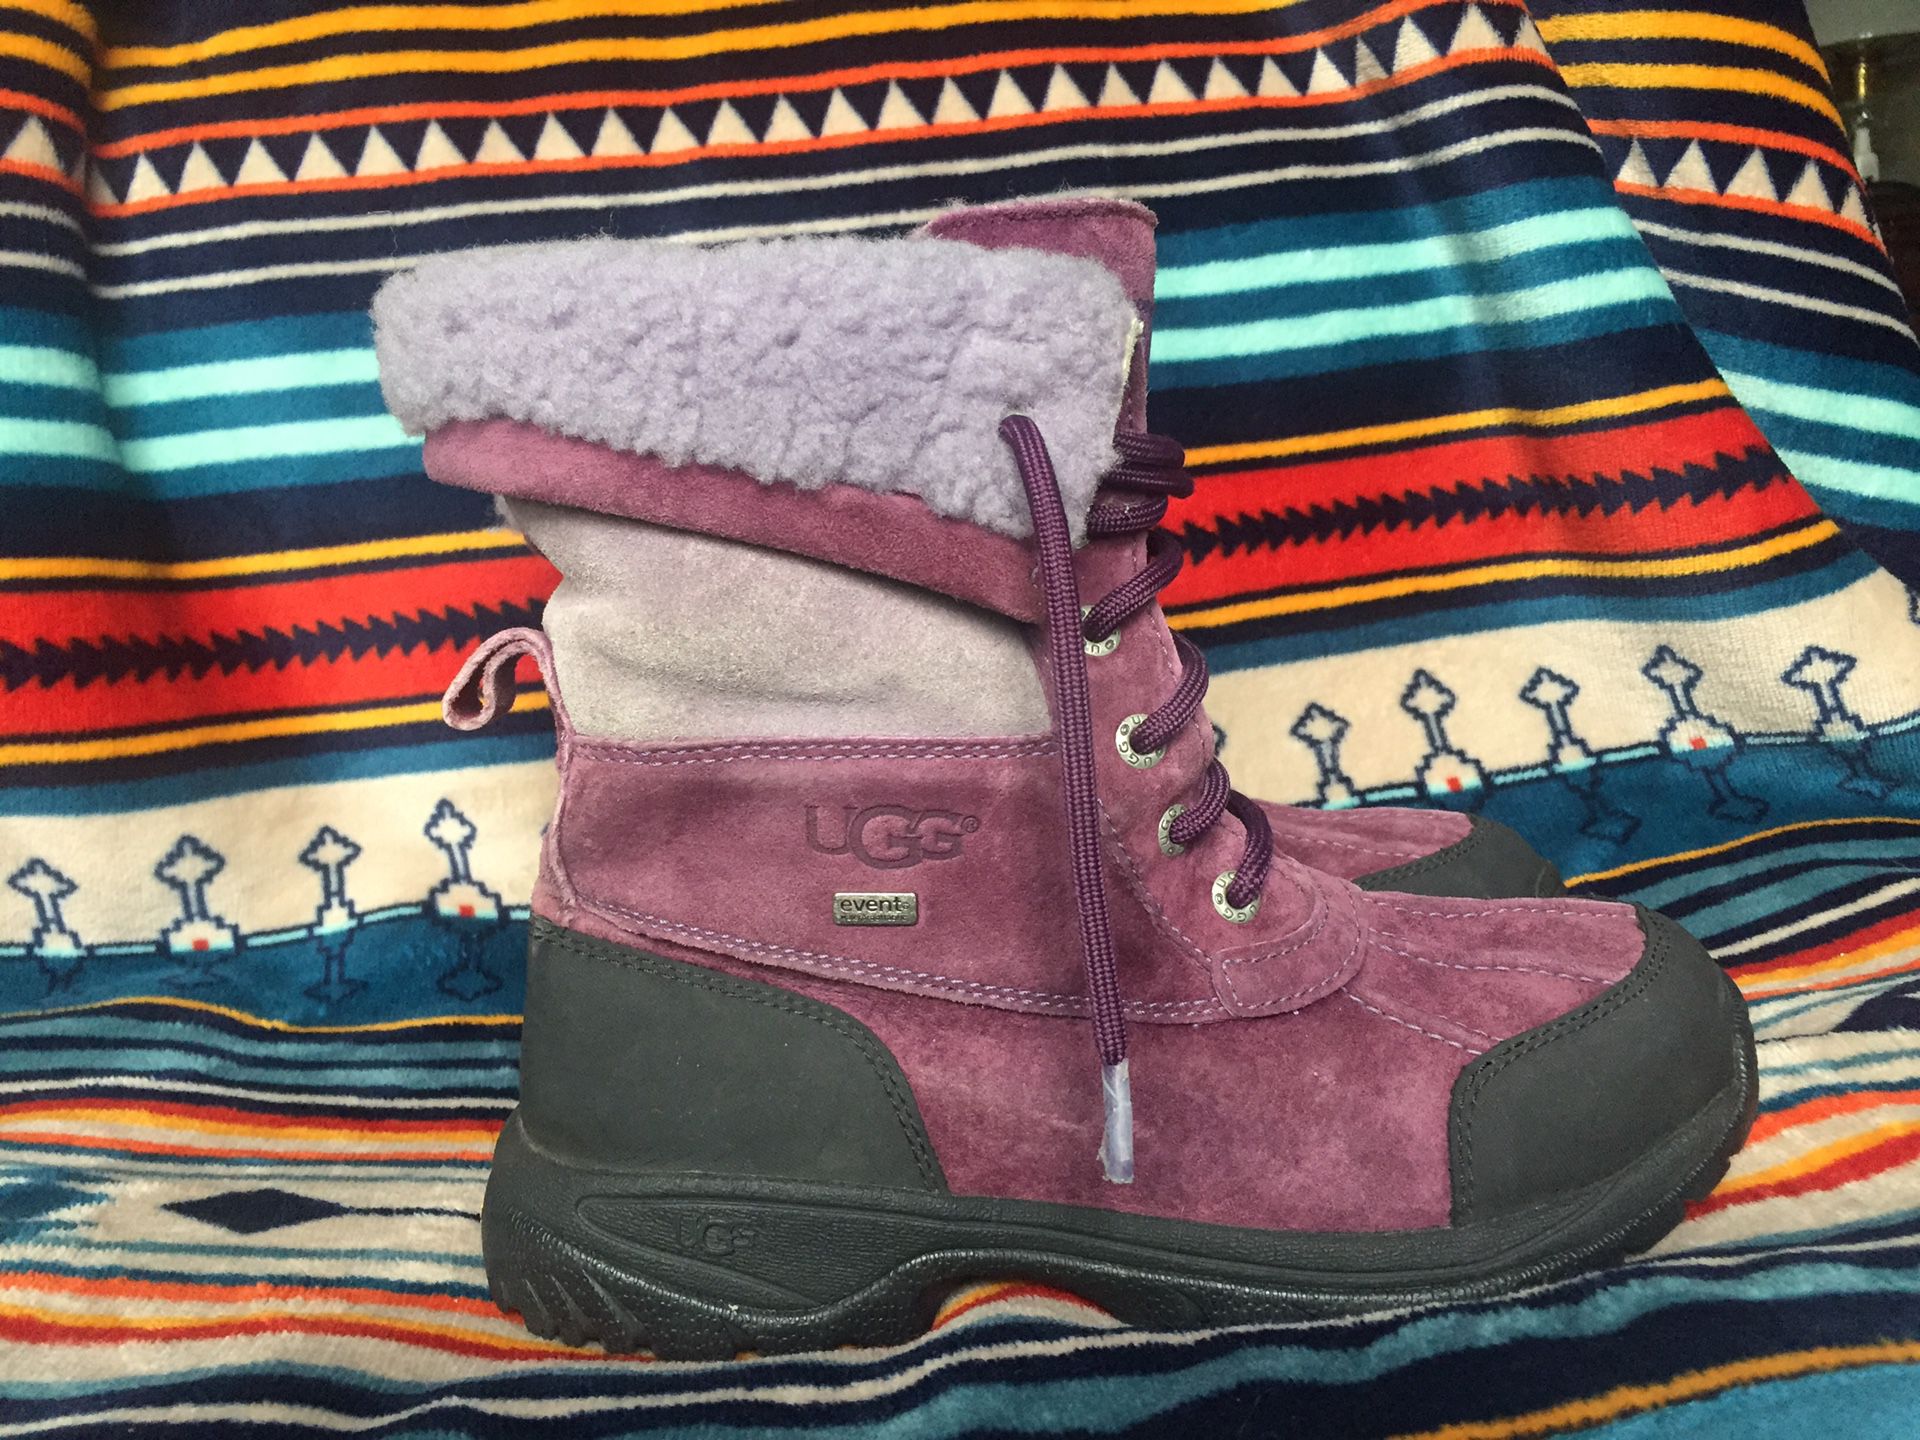 UGG Women’s Boots size 4